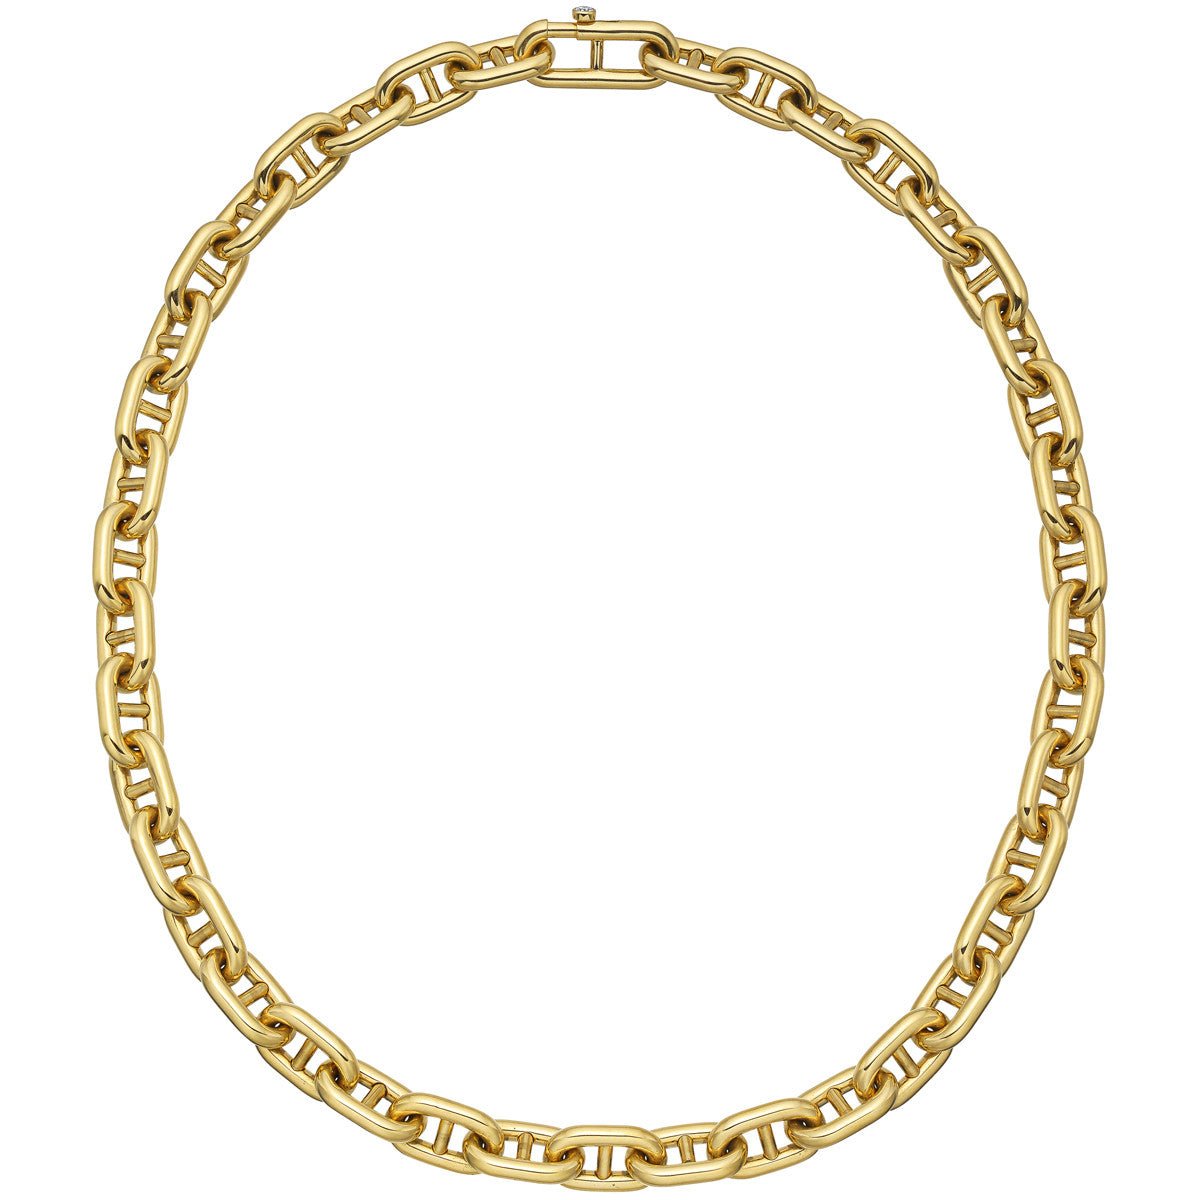 Greenleaf & Crosby - 18k Yellow Gold Anchor Link Necklace